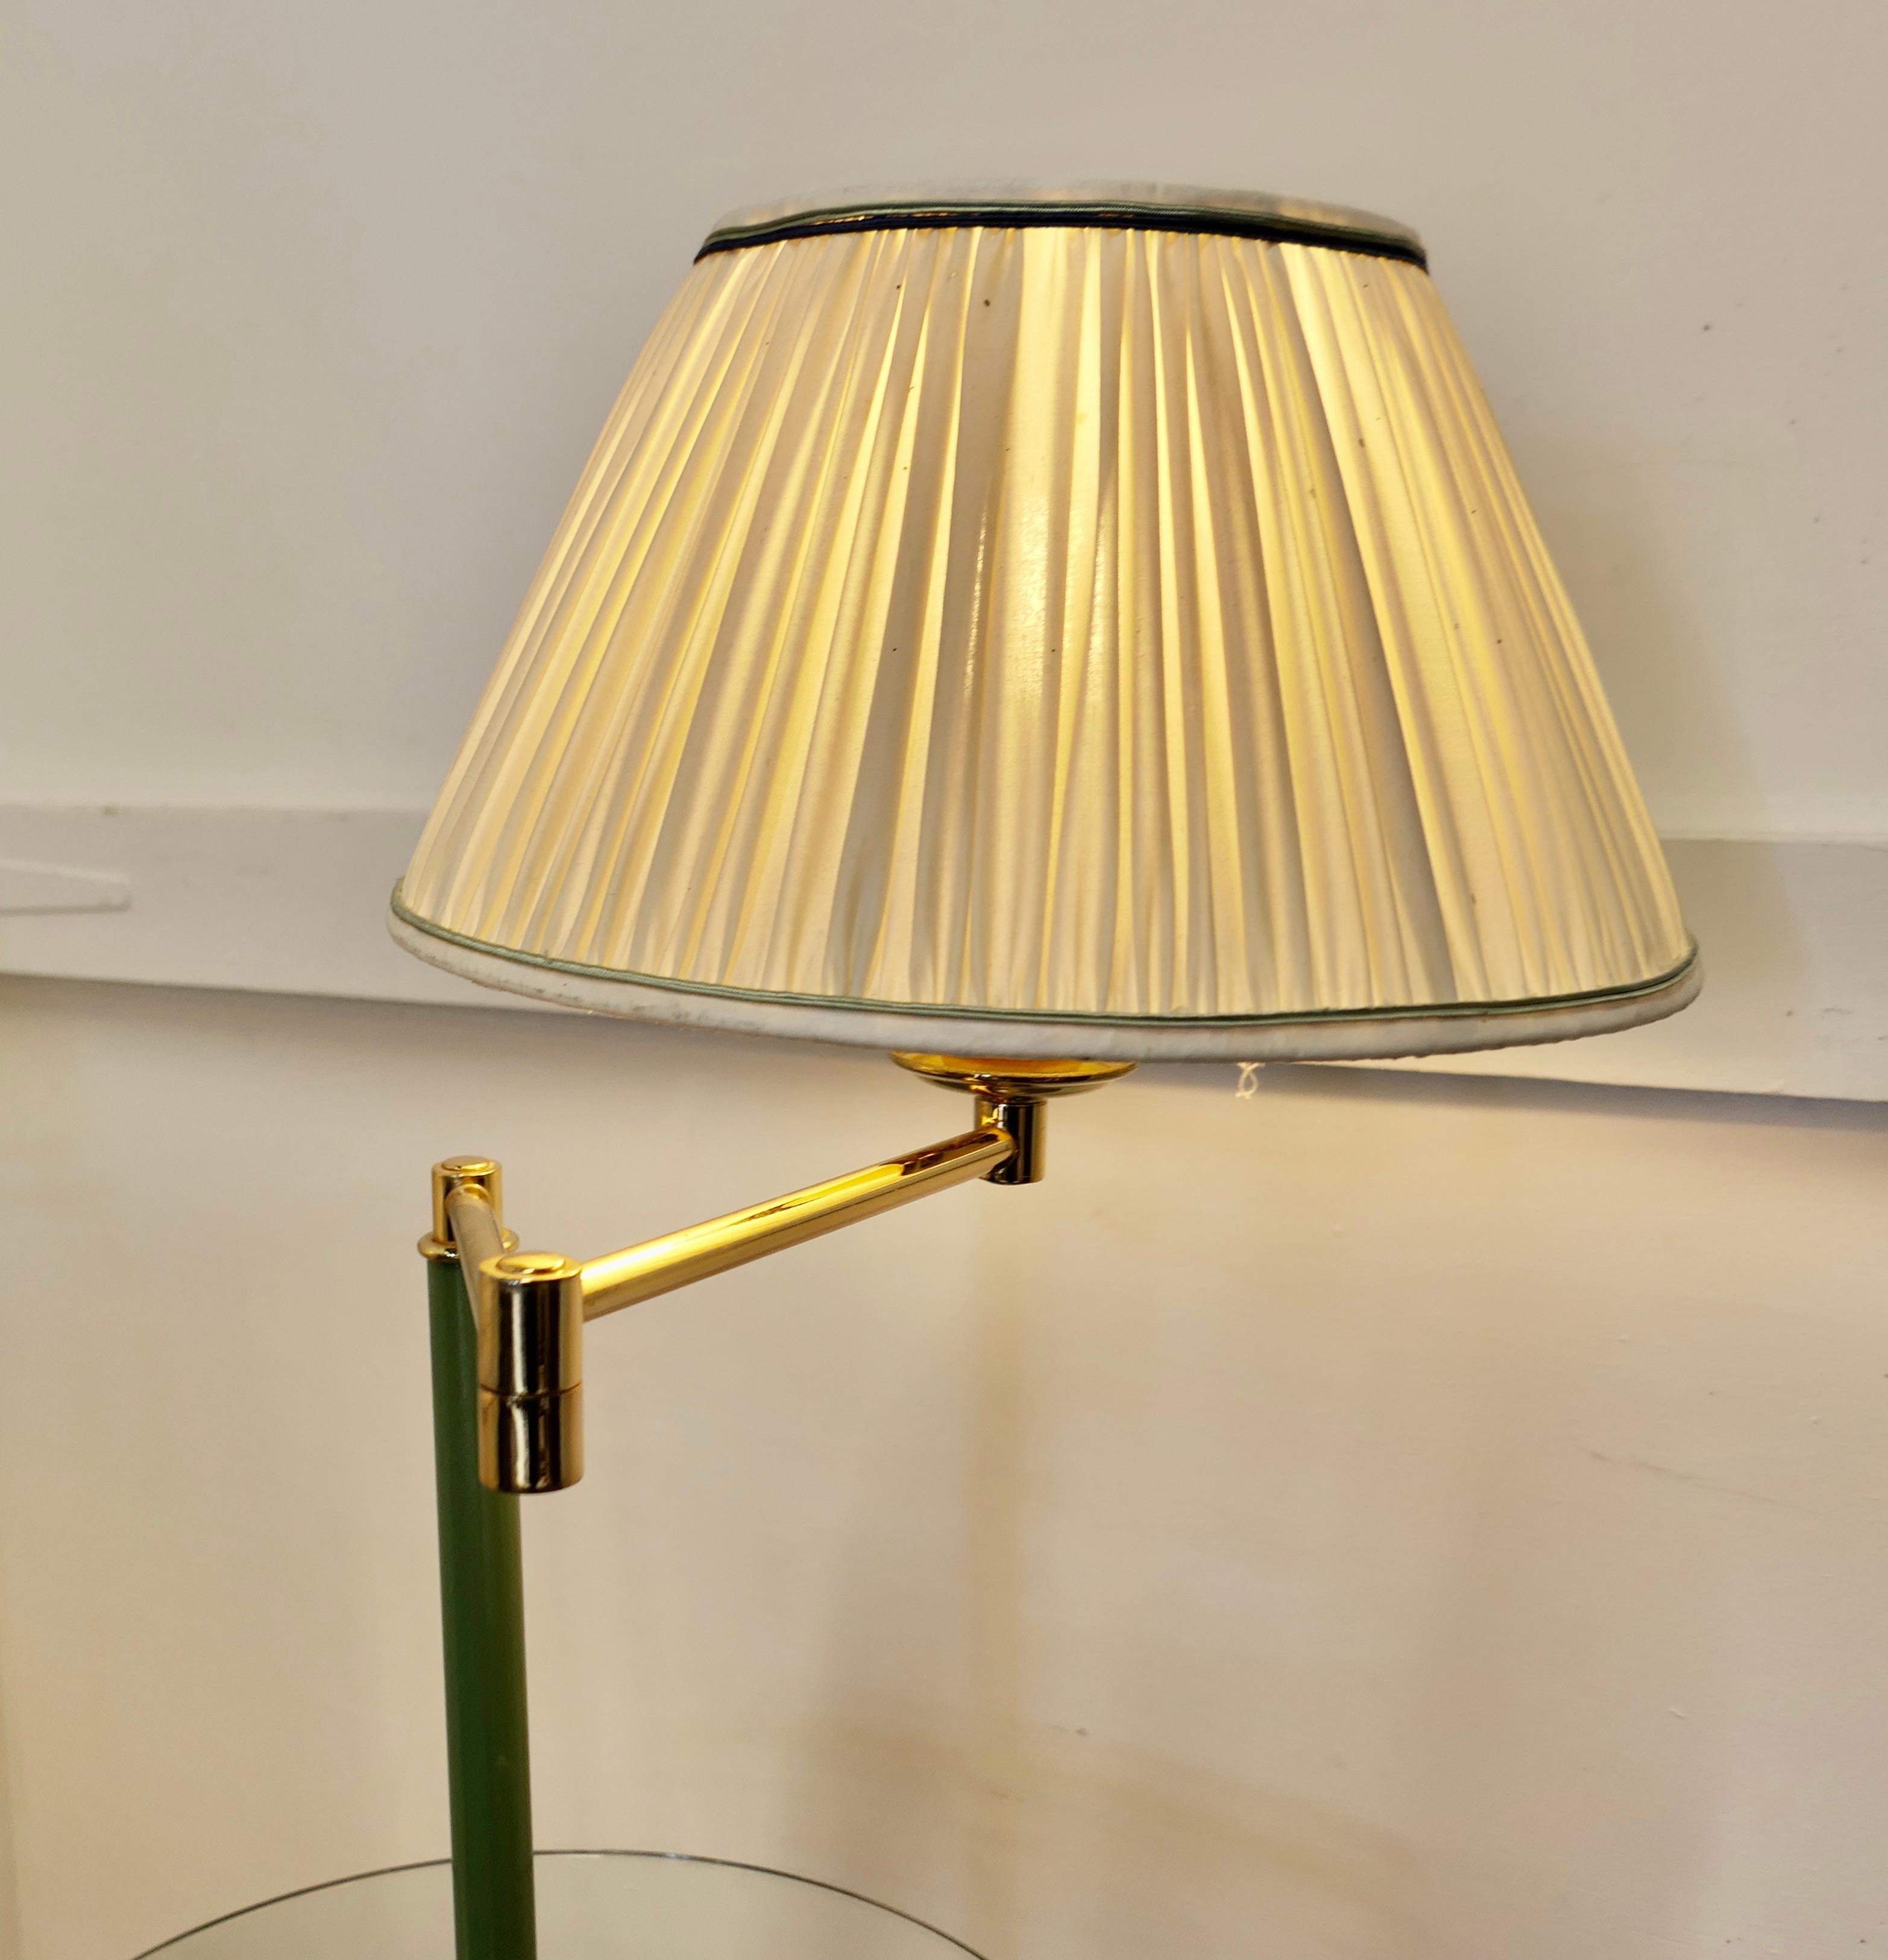 20th Century Pair of French Art Deco Adjustable Swing Arm Floor Lamps, Reading Lamps For Sale